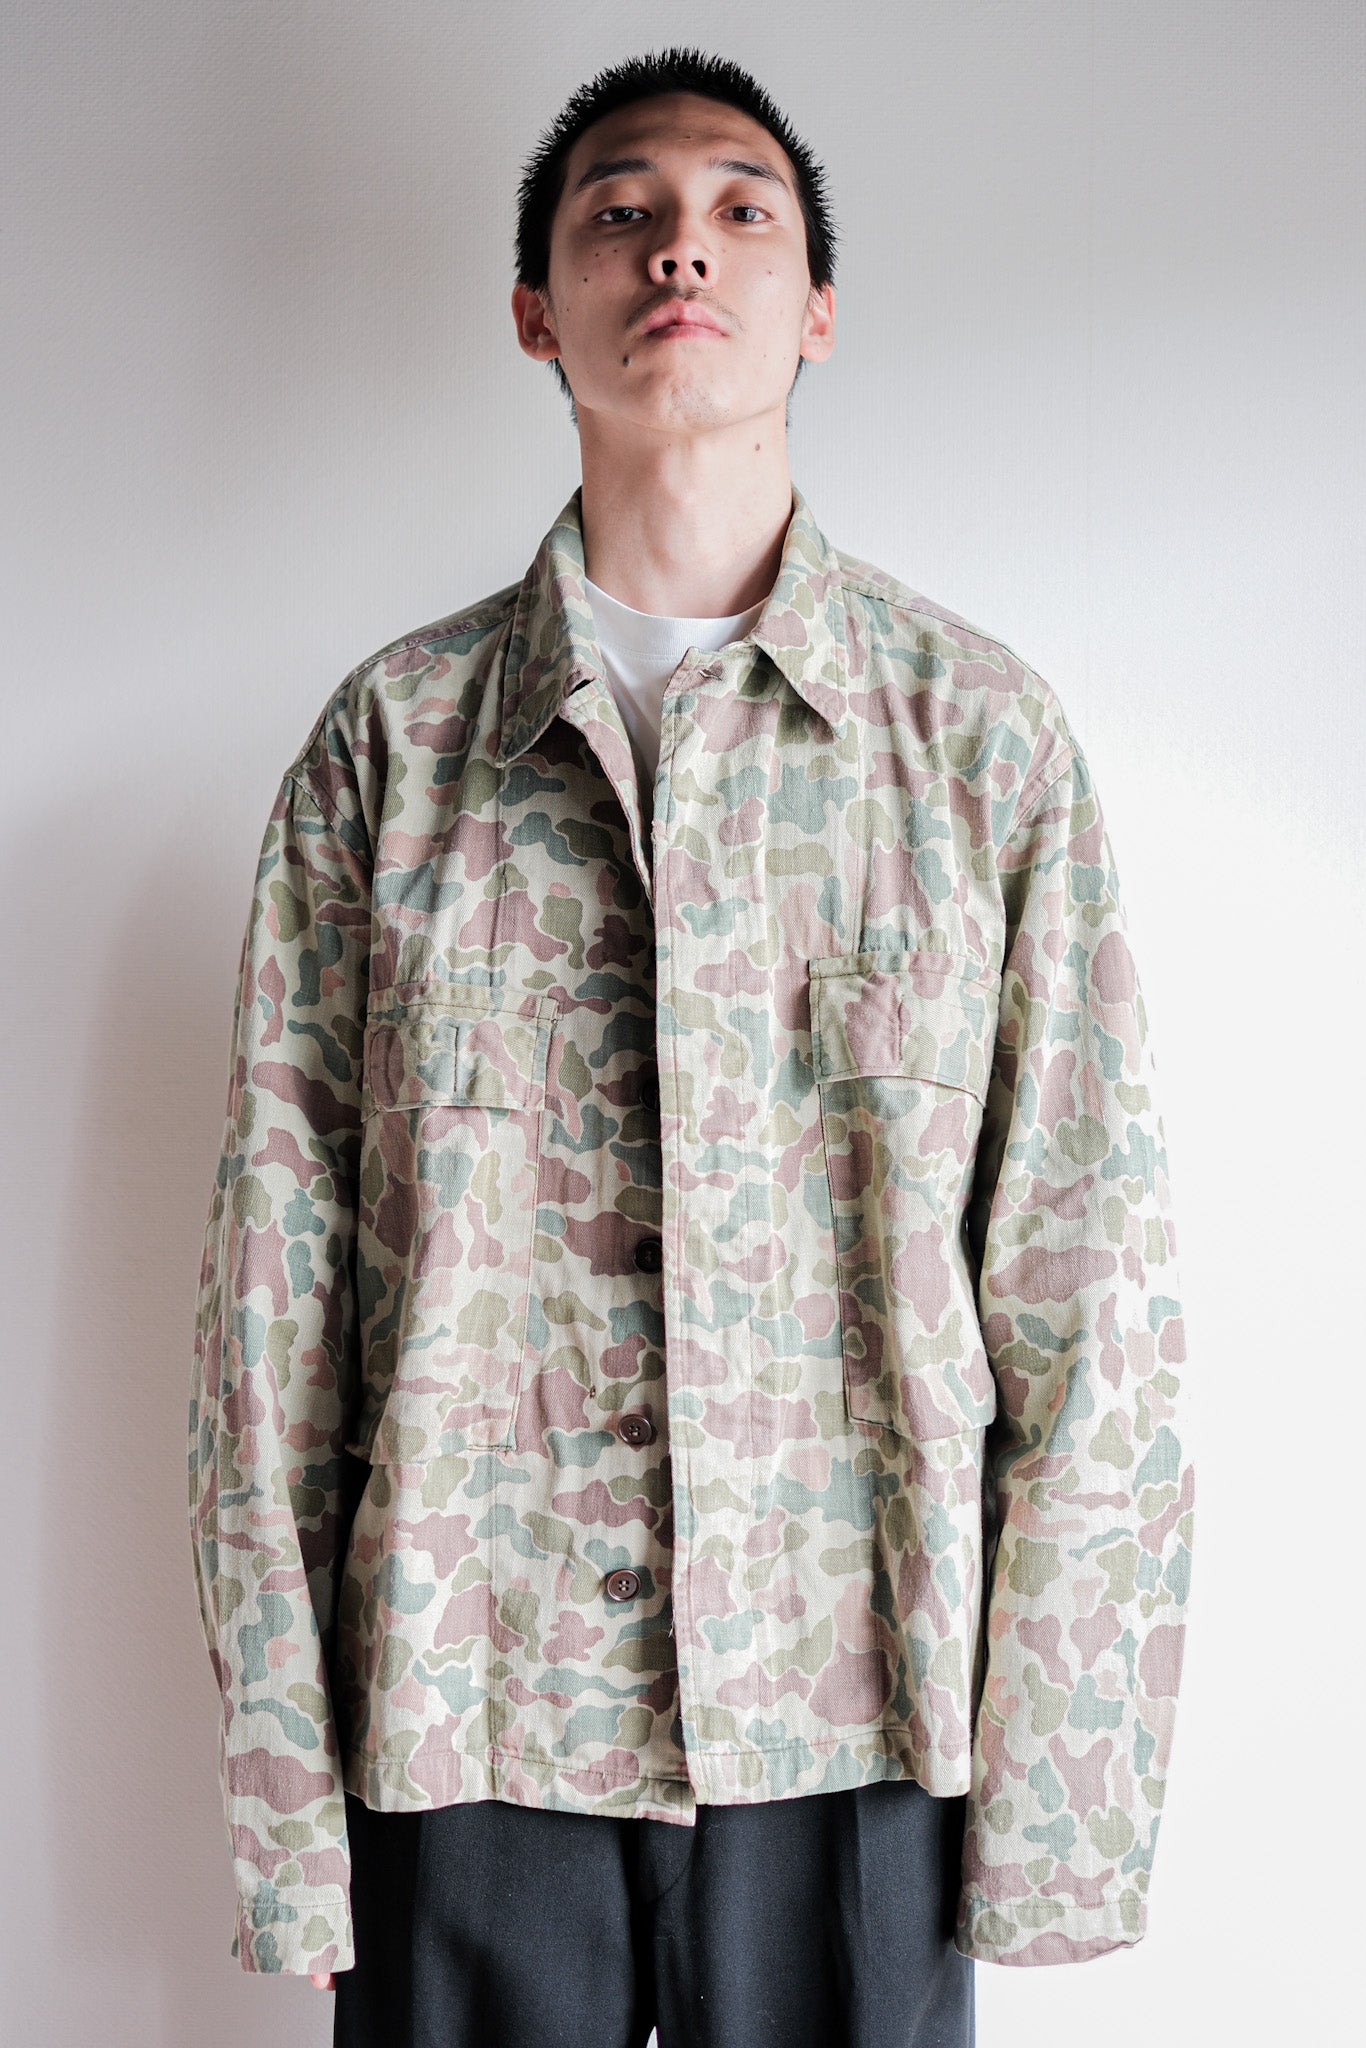 [~ 50's] Néerlandais Army Frogspin Camouflage Camouflage Field Veste.52